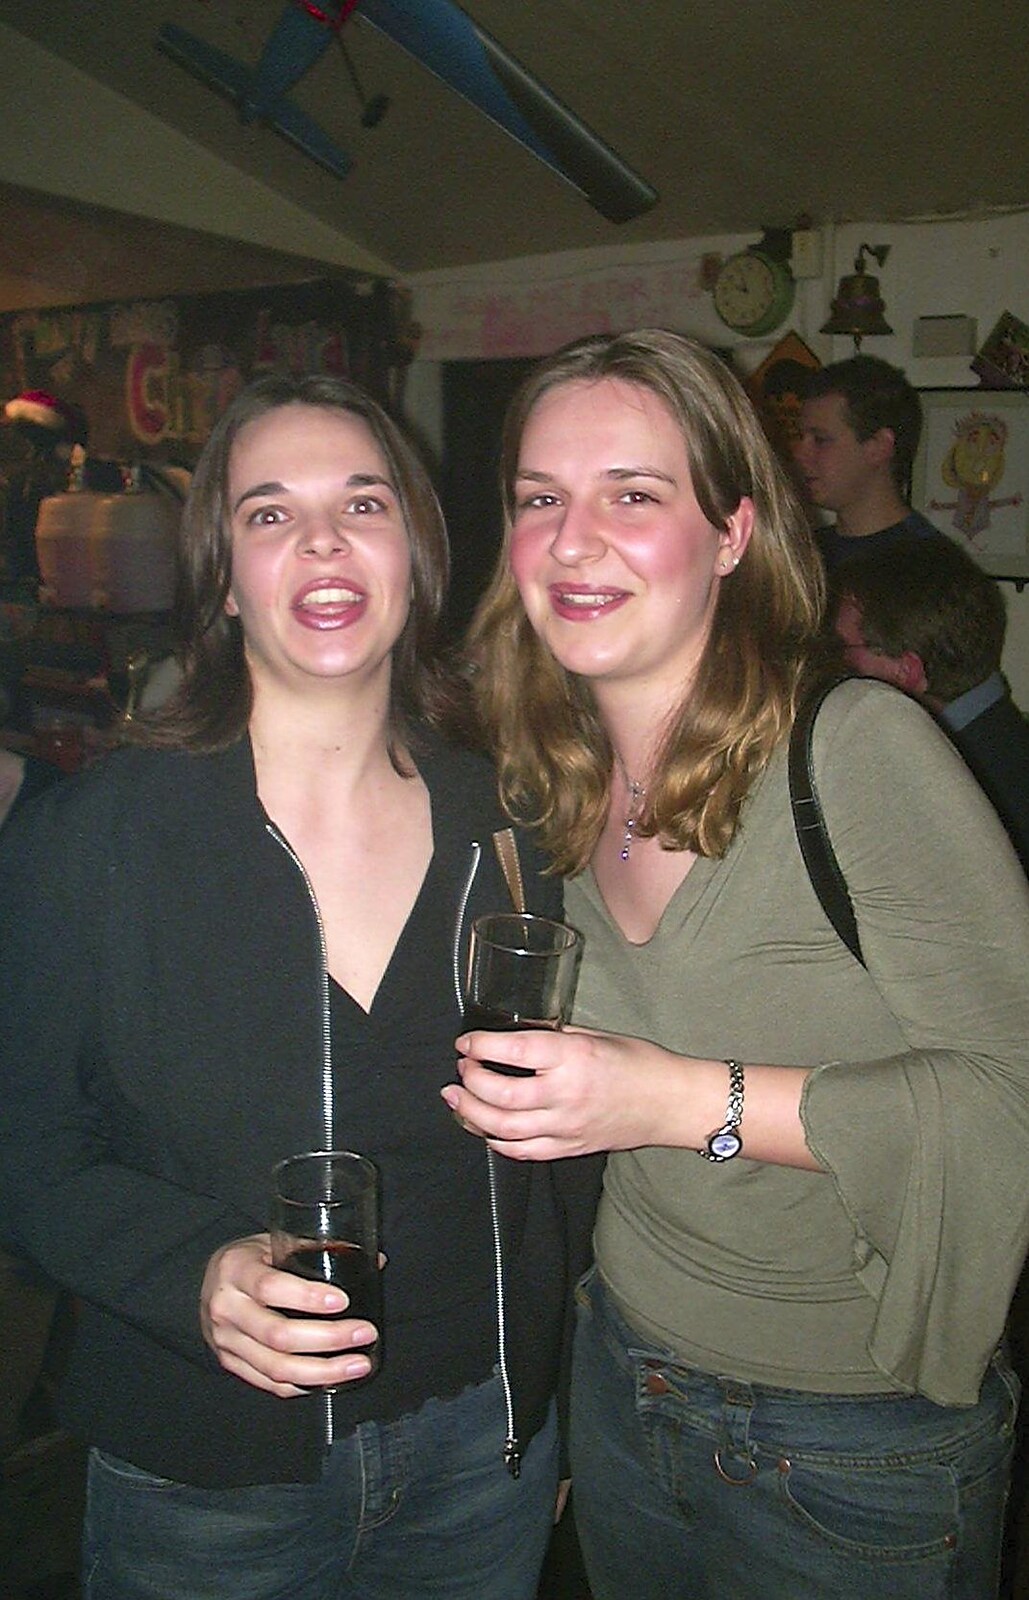 Jen and Jess from The Swan's Cellar, and Bill's Mambo Night at the Barrel, Banham, Norfolk - 6th February 2004